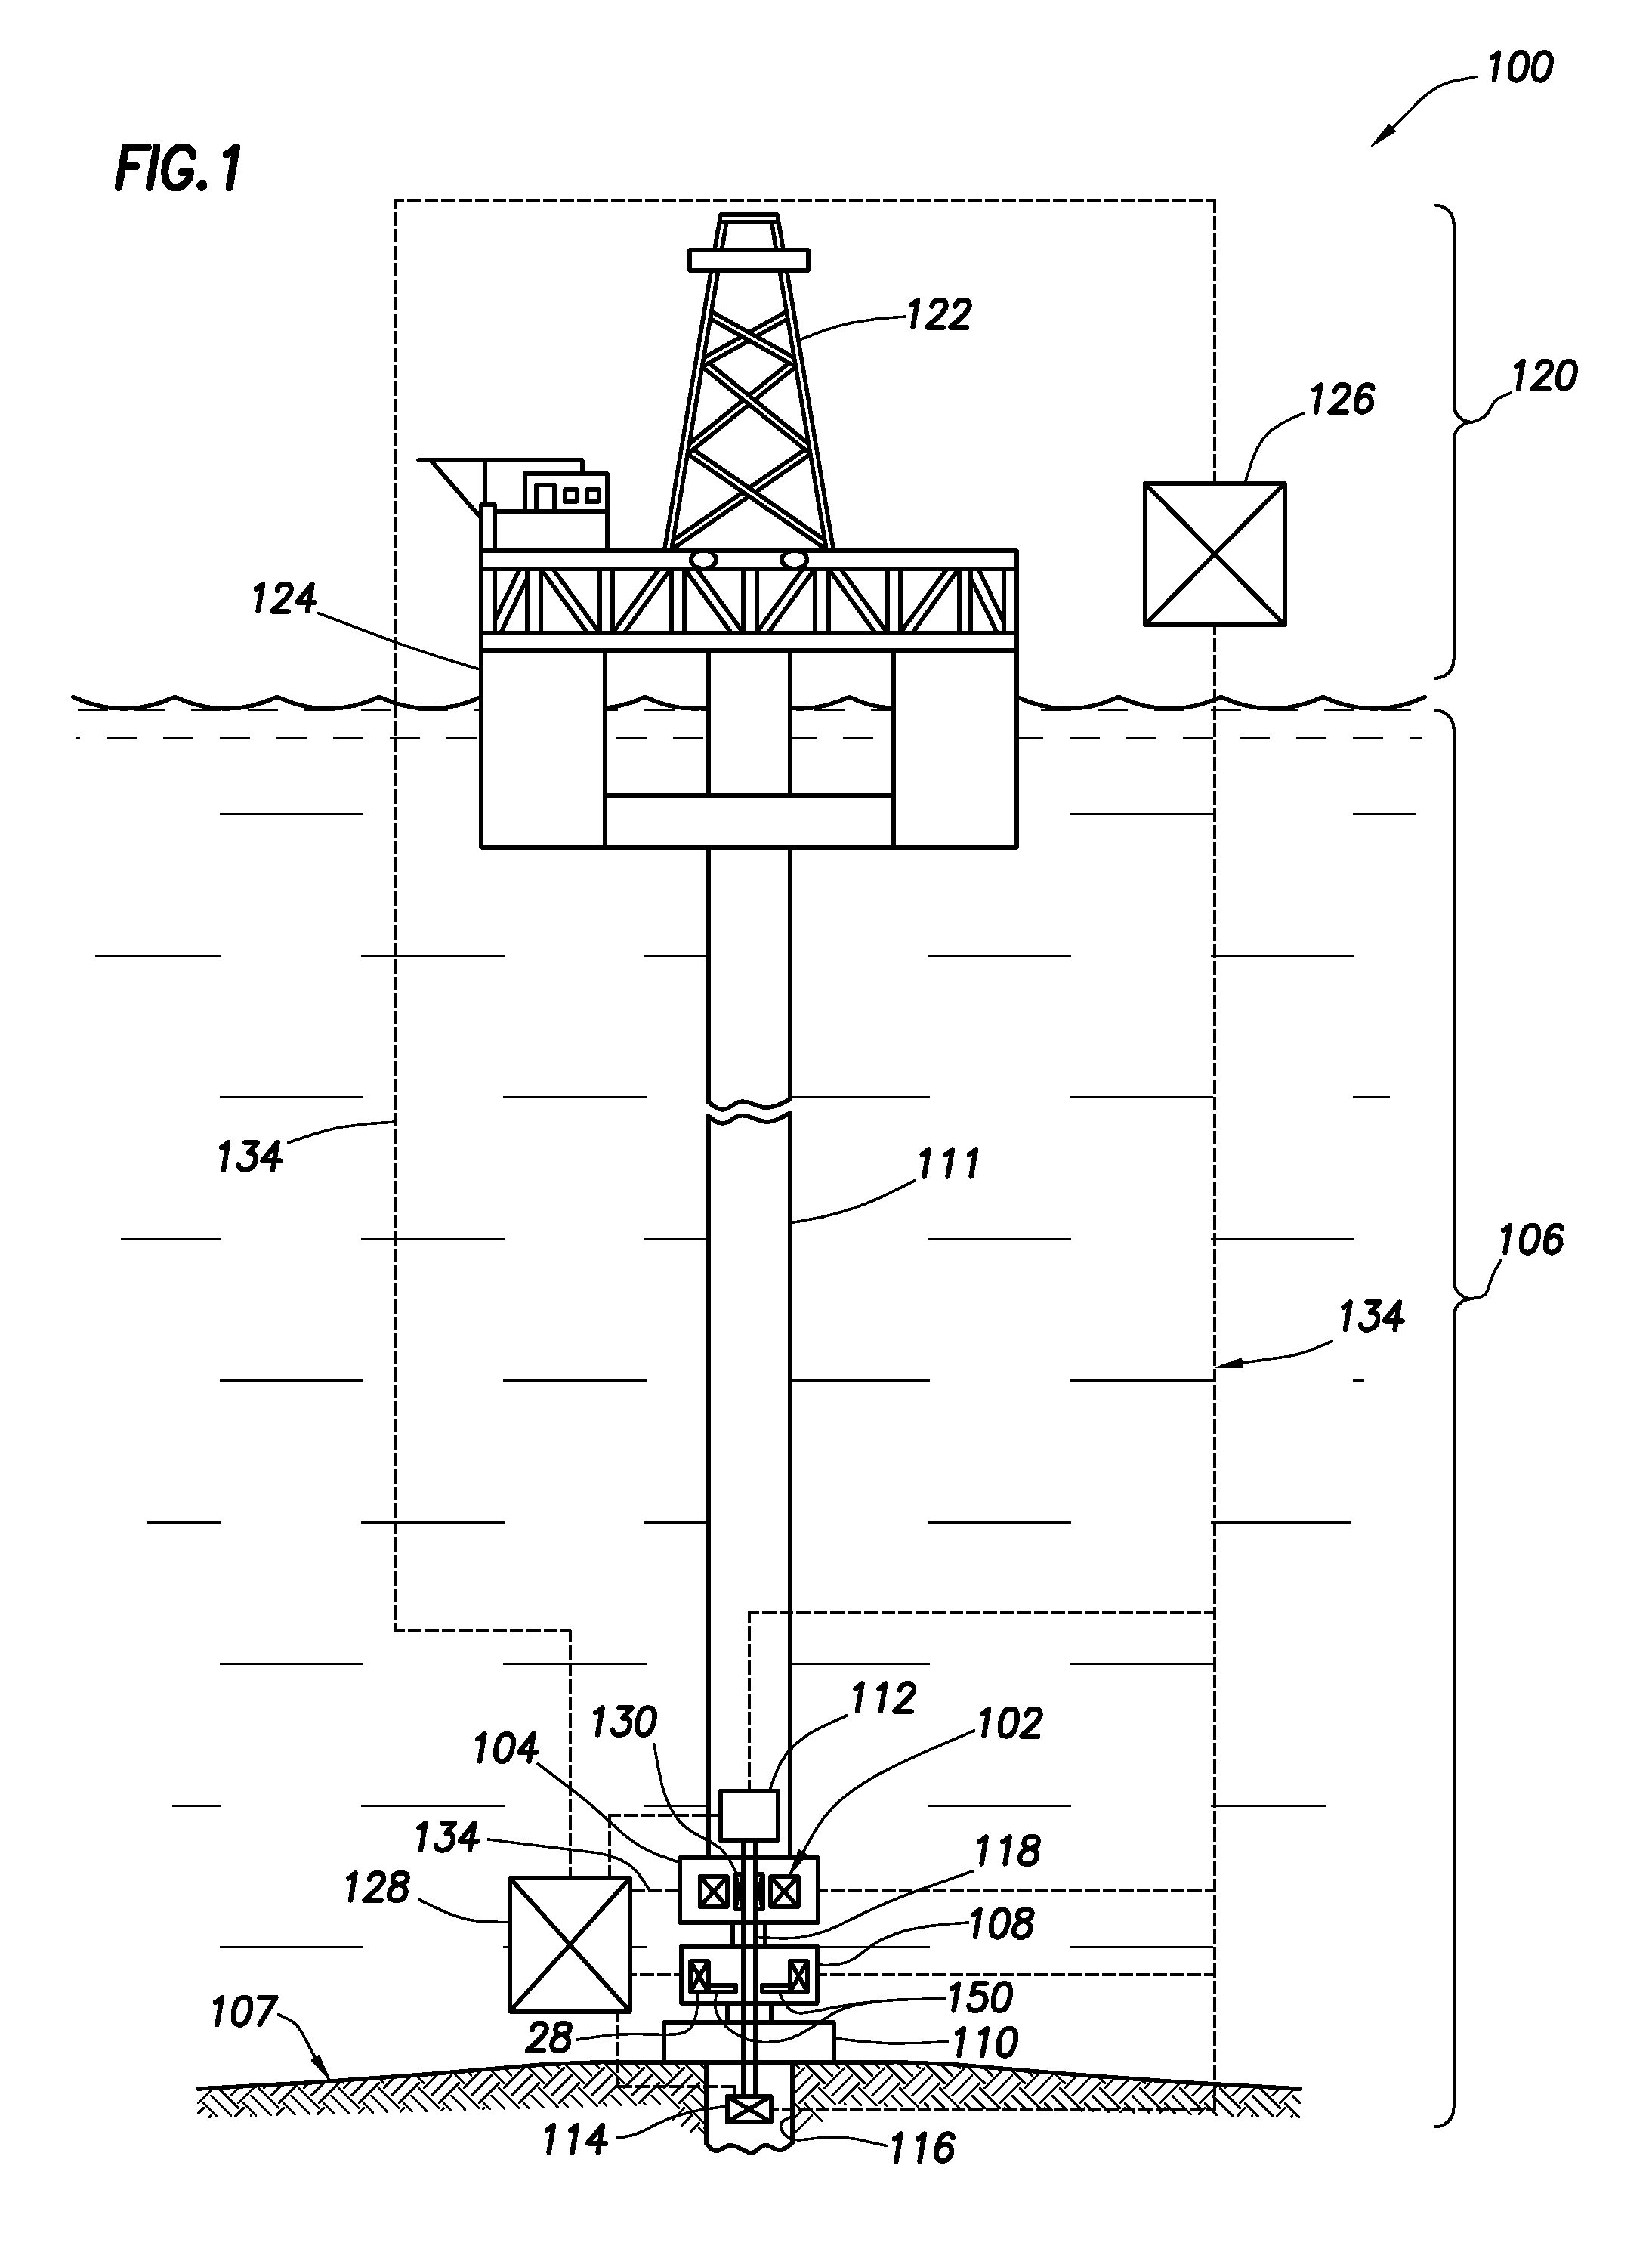 Tubular severing system and method of using same